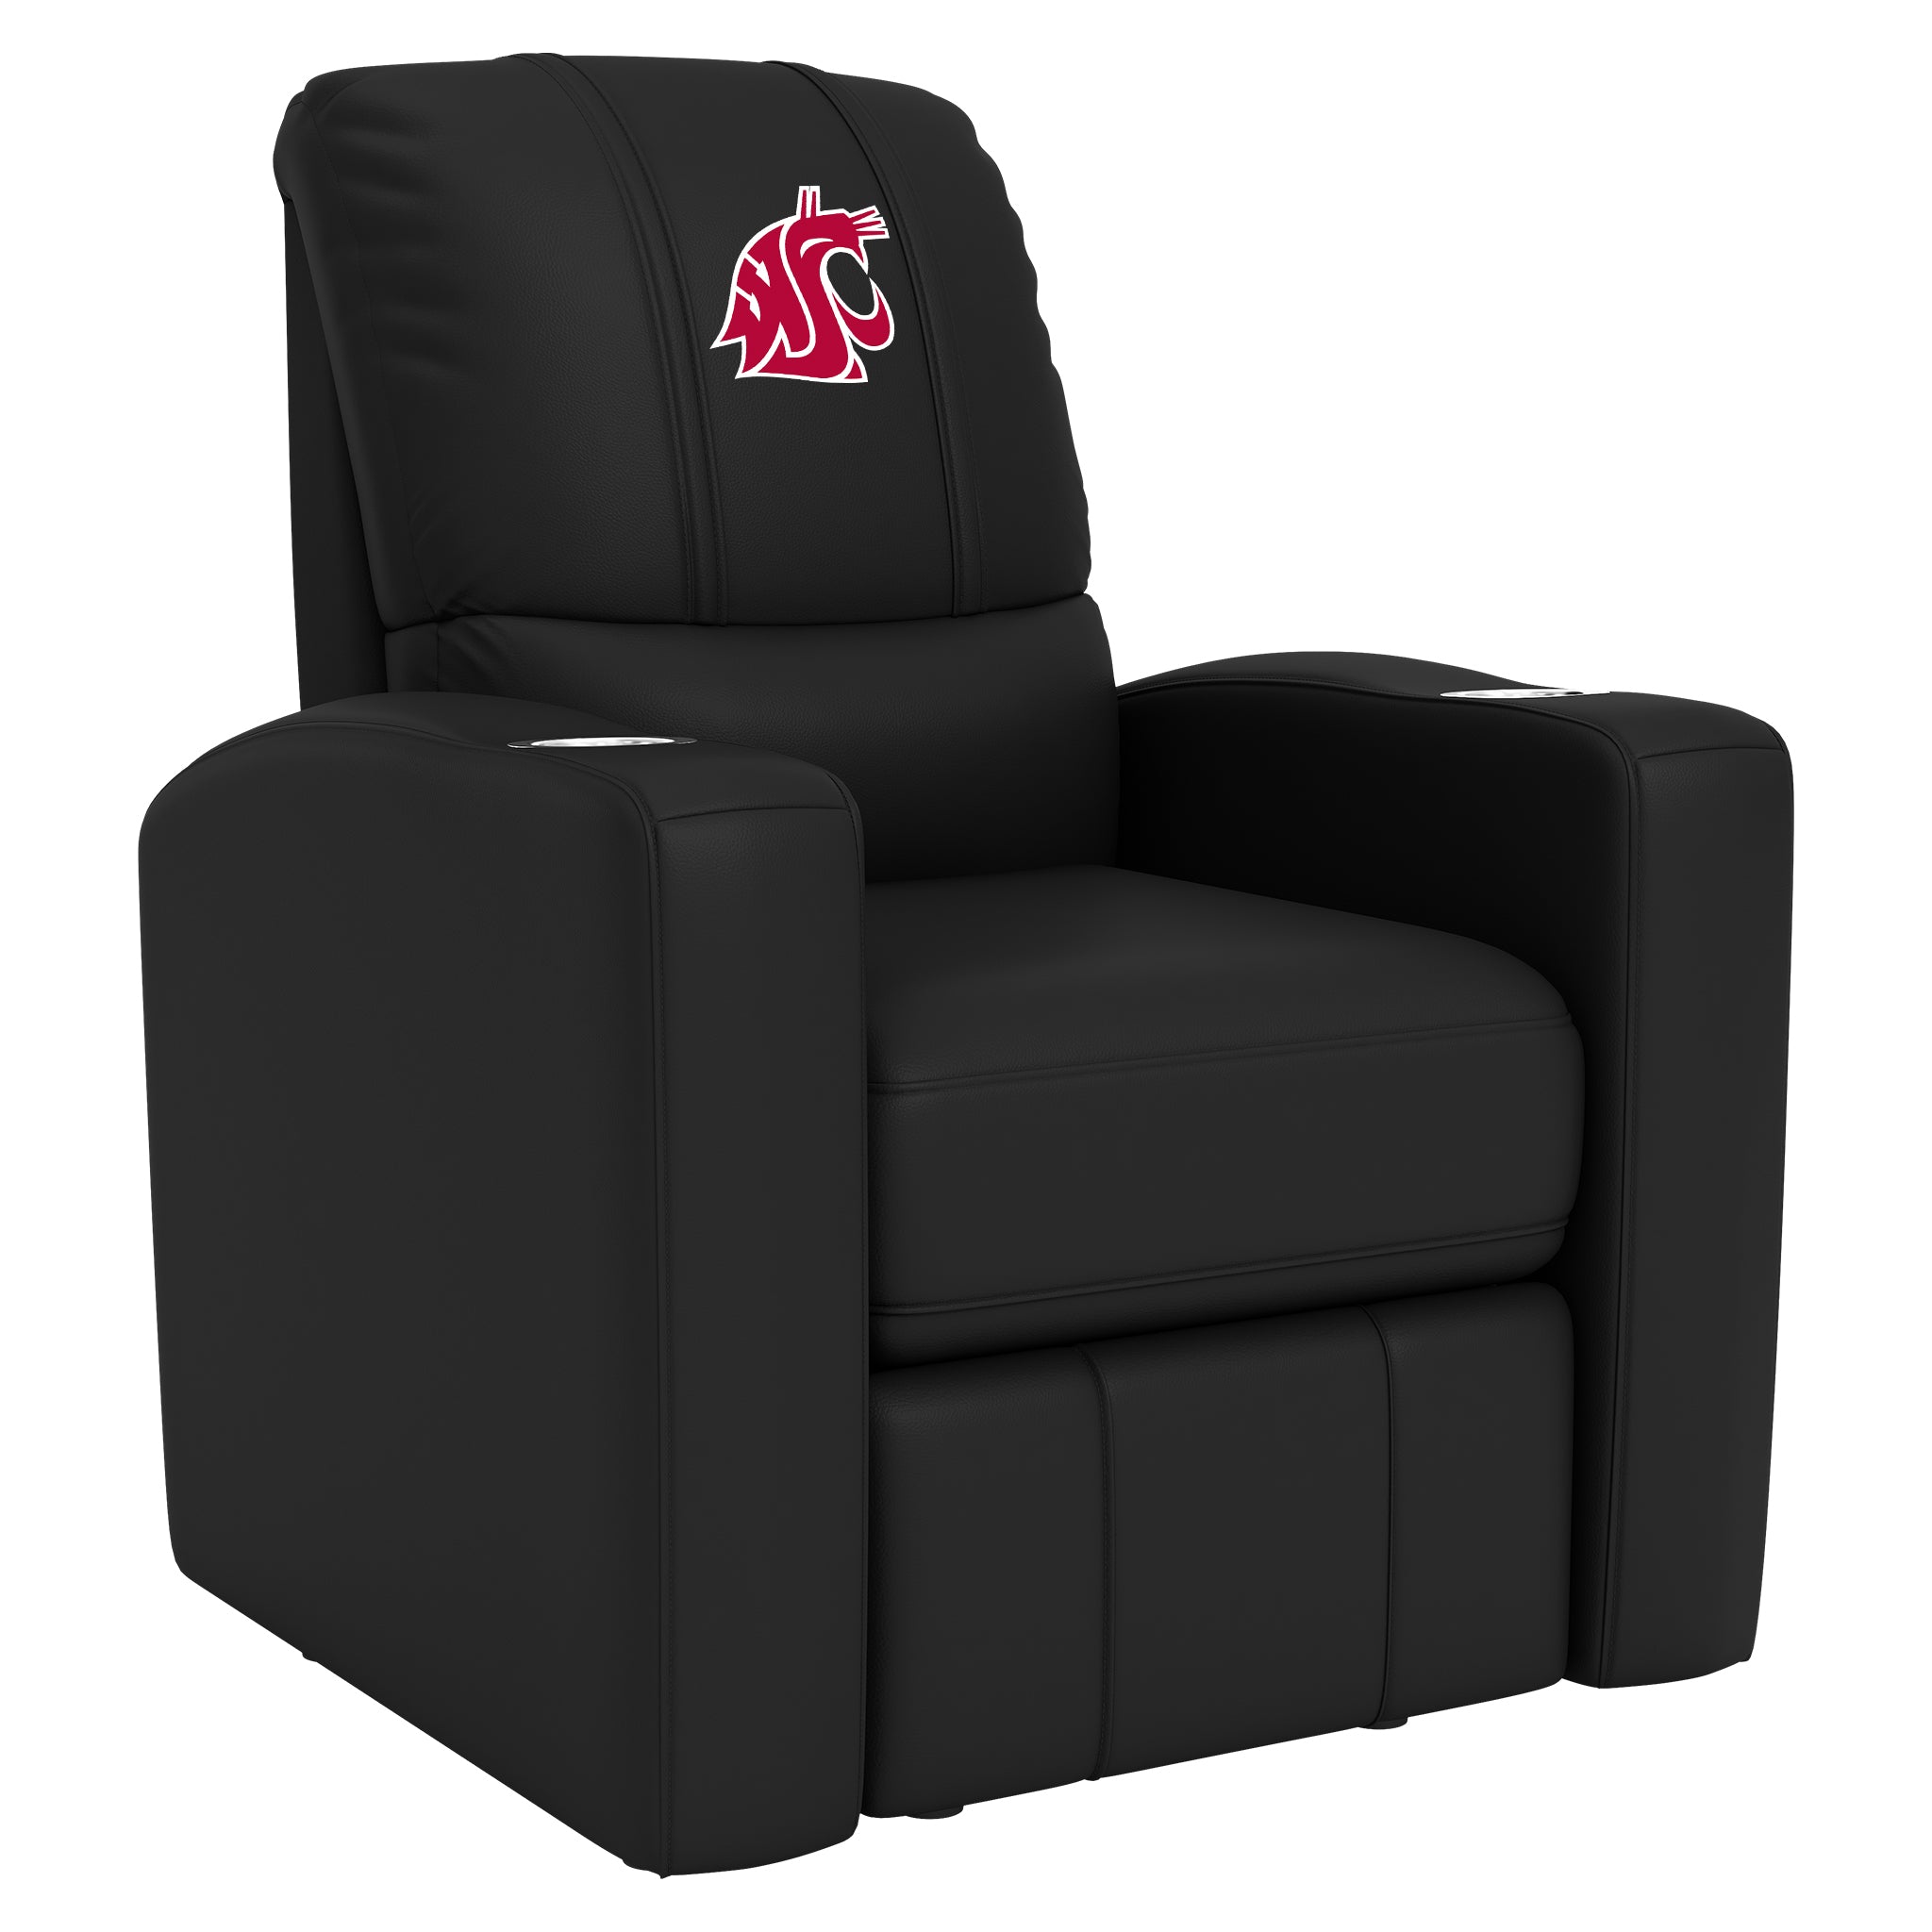 Washington State Cougars Stealth Recliner with Washington State Cougars Logo